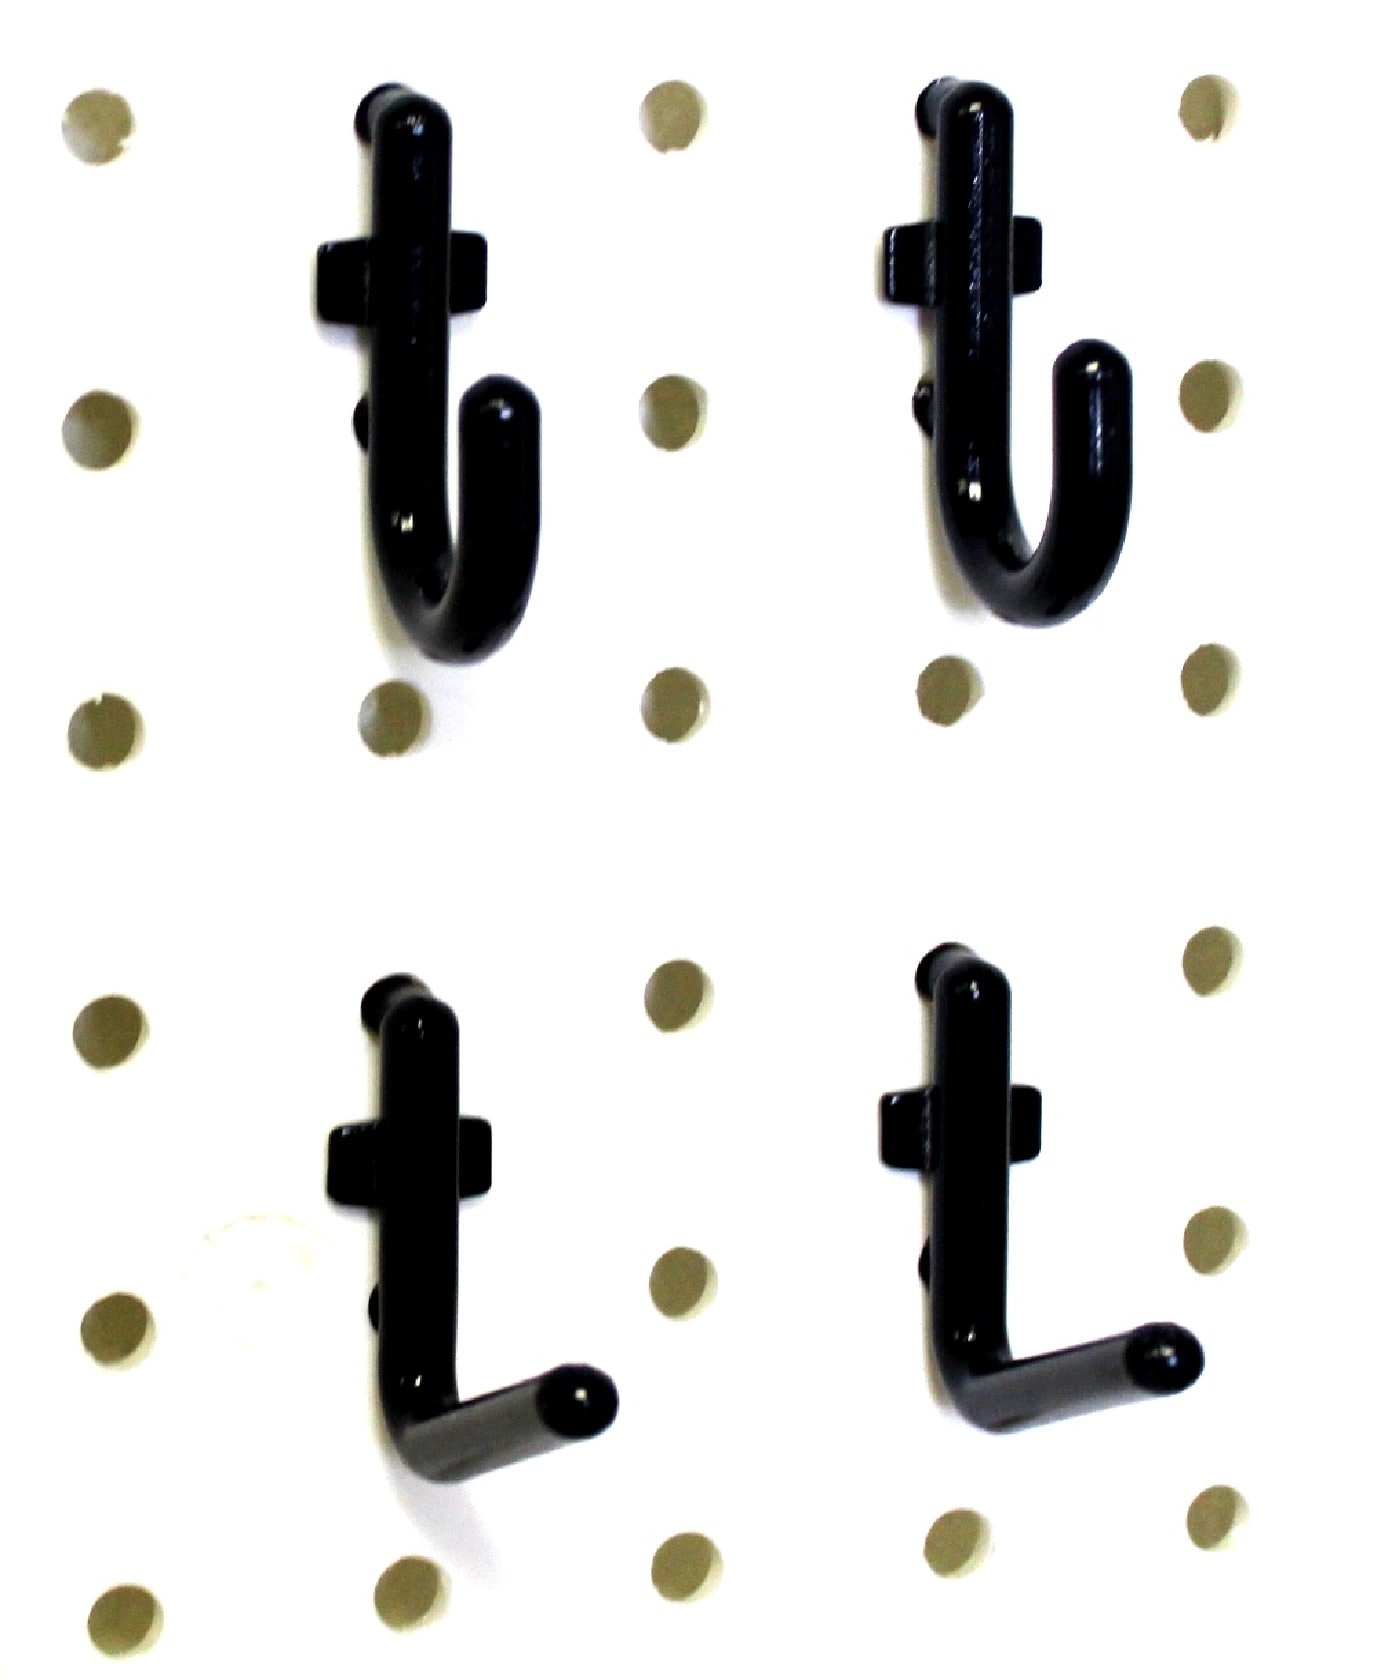  Right Arrange – Stainless Steel Pegboard Hooks 50-Pack 1in J- Hook - Will Not Fall Out - Fits Any Peg Board - Multipurpose - Organize  Necklaces, Jewelry, Retail Items, Keys, Craft or